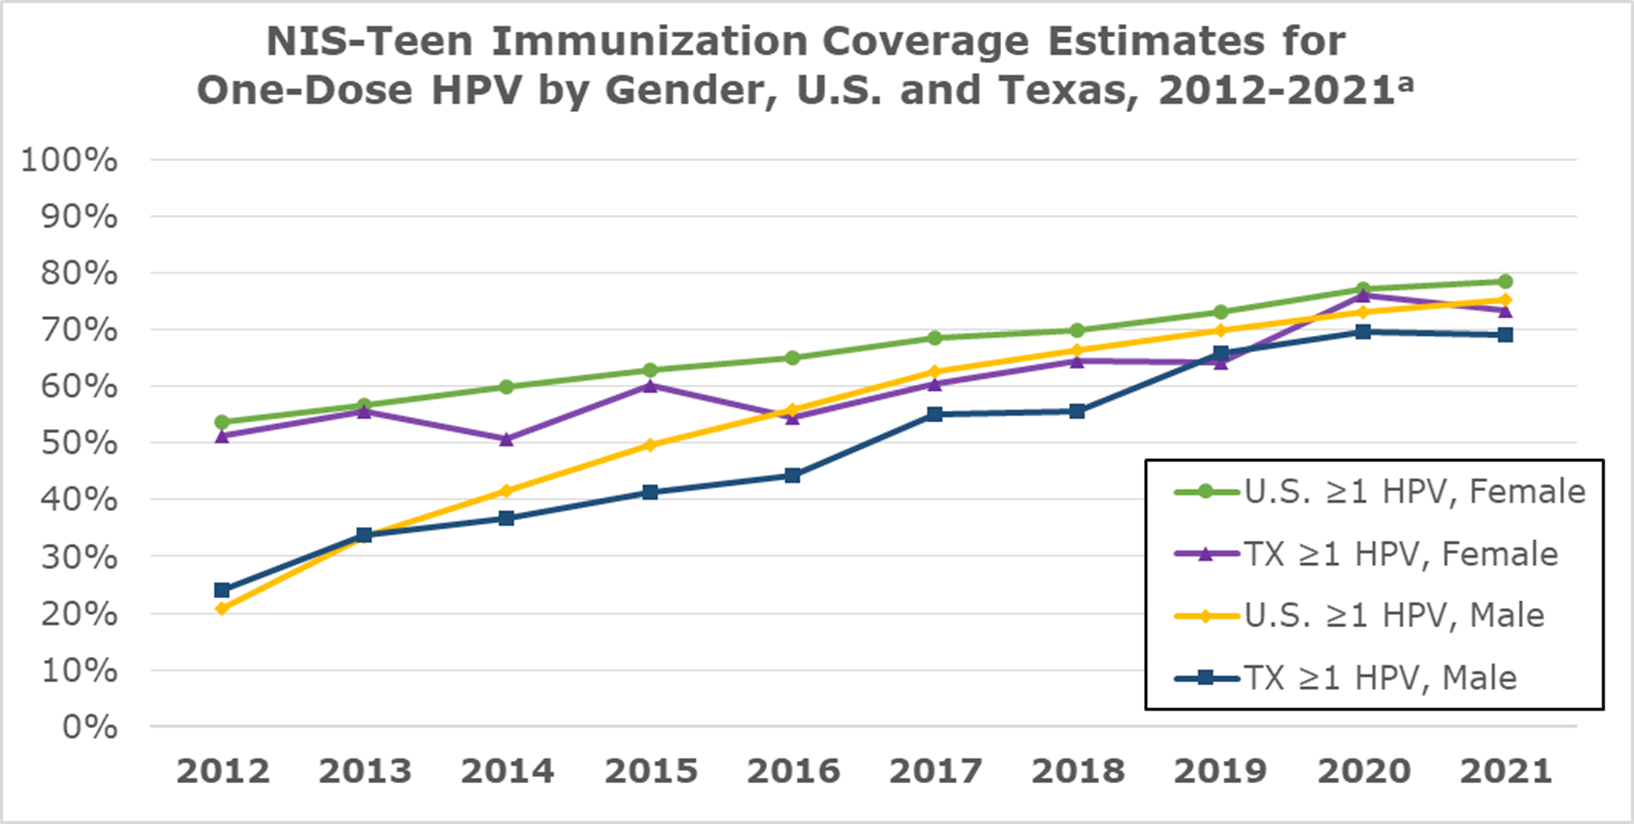 "Chart showing NIS-Teen Immunization Coverage Estimates for One-Dose HPV by Gender, U.S. and Texas, 2012-2021"